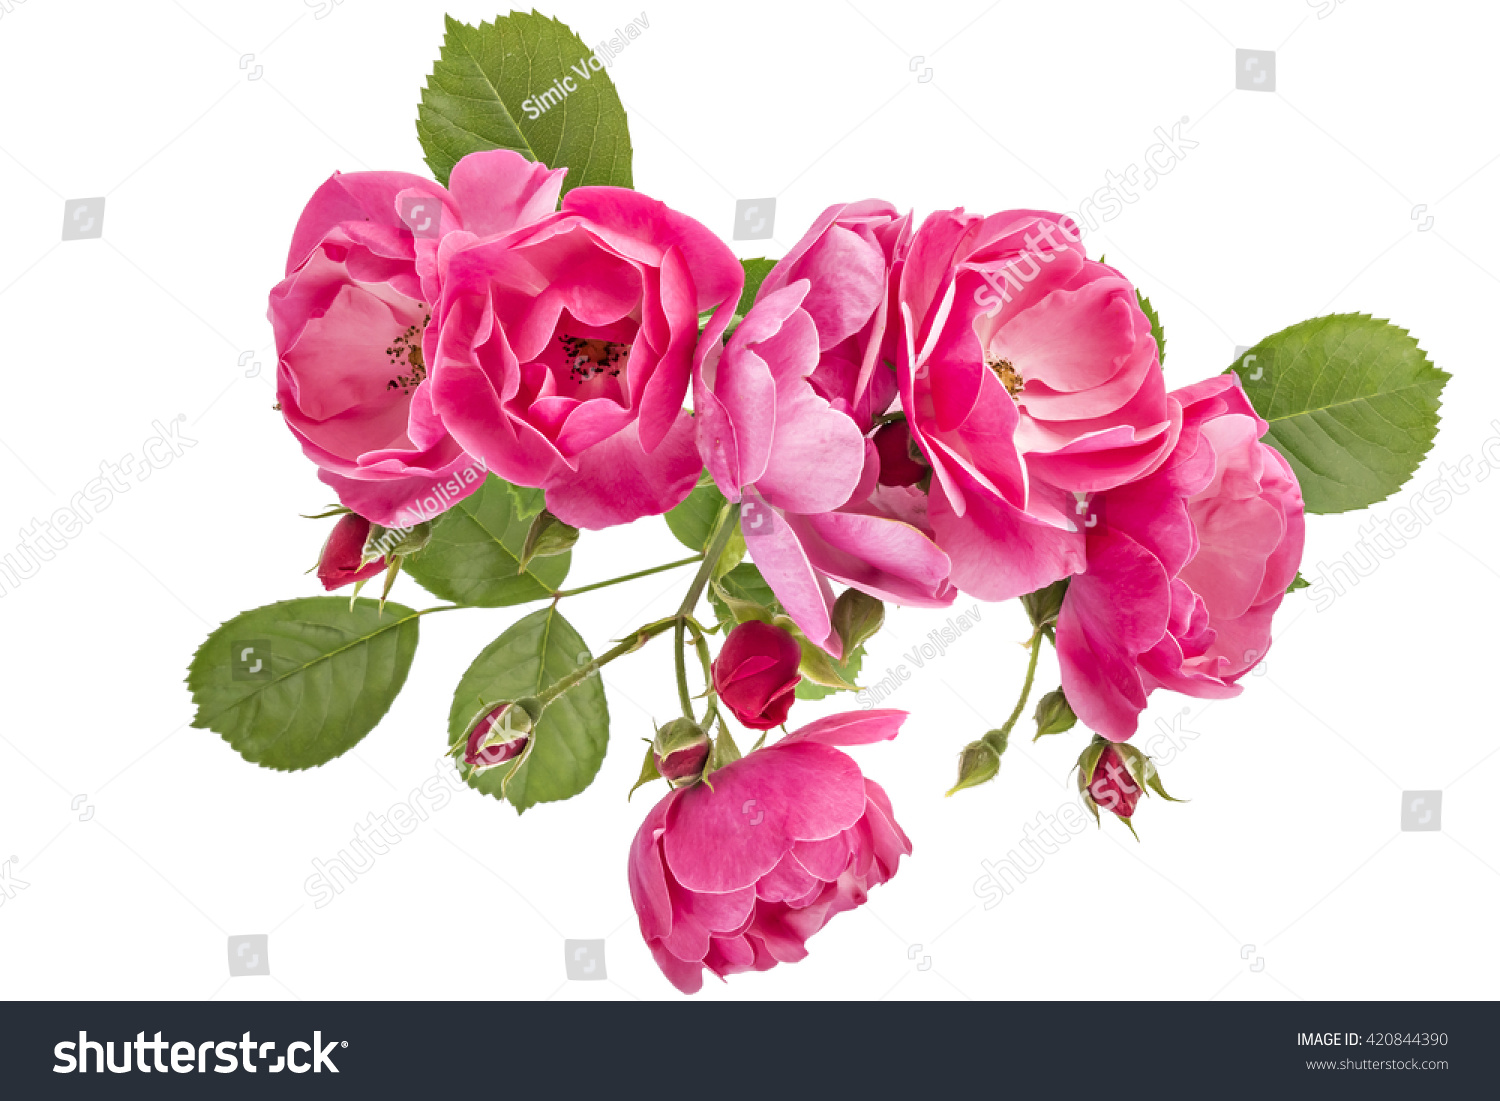 Flowering branch of pink wild rose flowers isolated on white #420844390